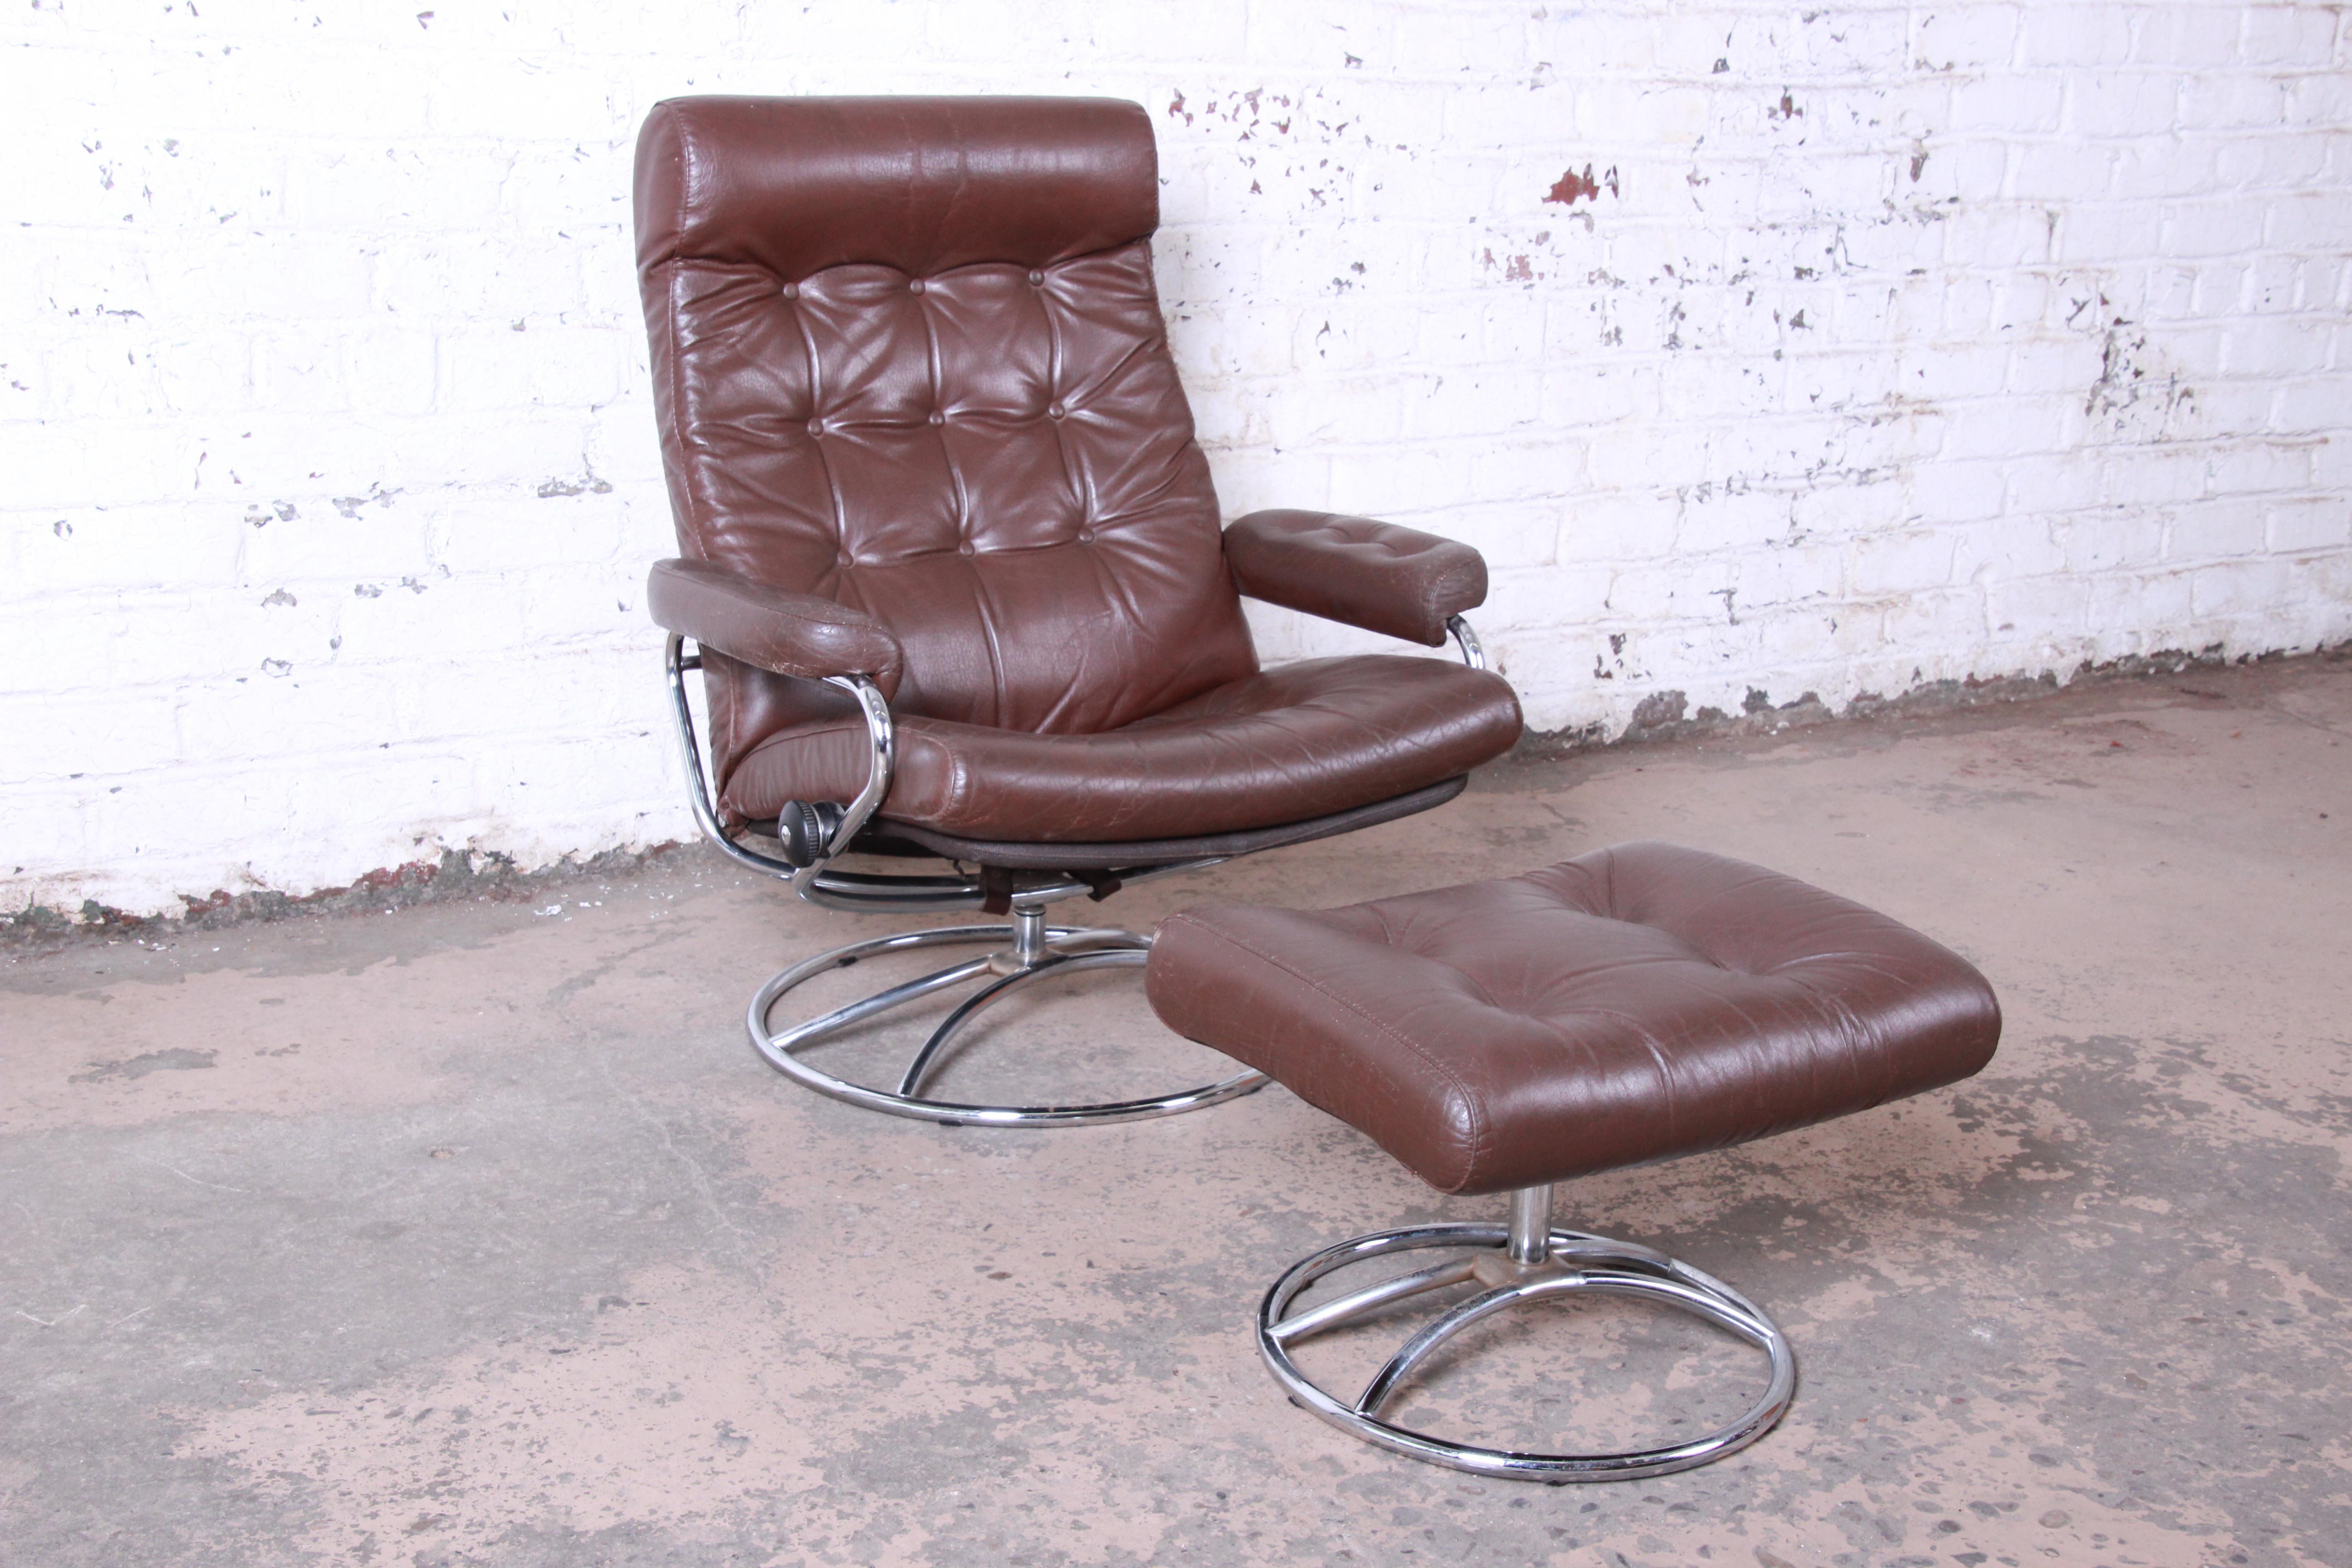 A beautiful vintage Ekornes stressless lounge chair and ottoman in brown leather. The chair features soft tufted brown leather upholstery and sleek Scandinavian design. The leather is worn in with a nice patina. Both the chair and ottoman have